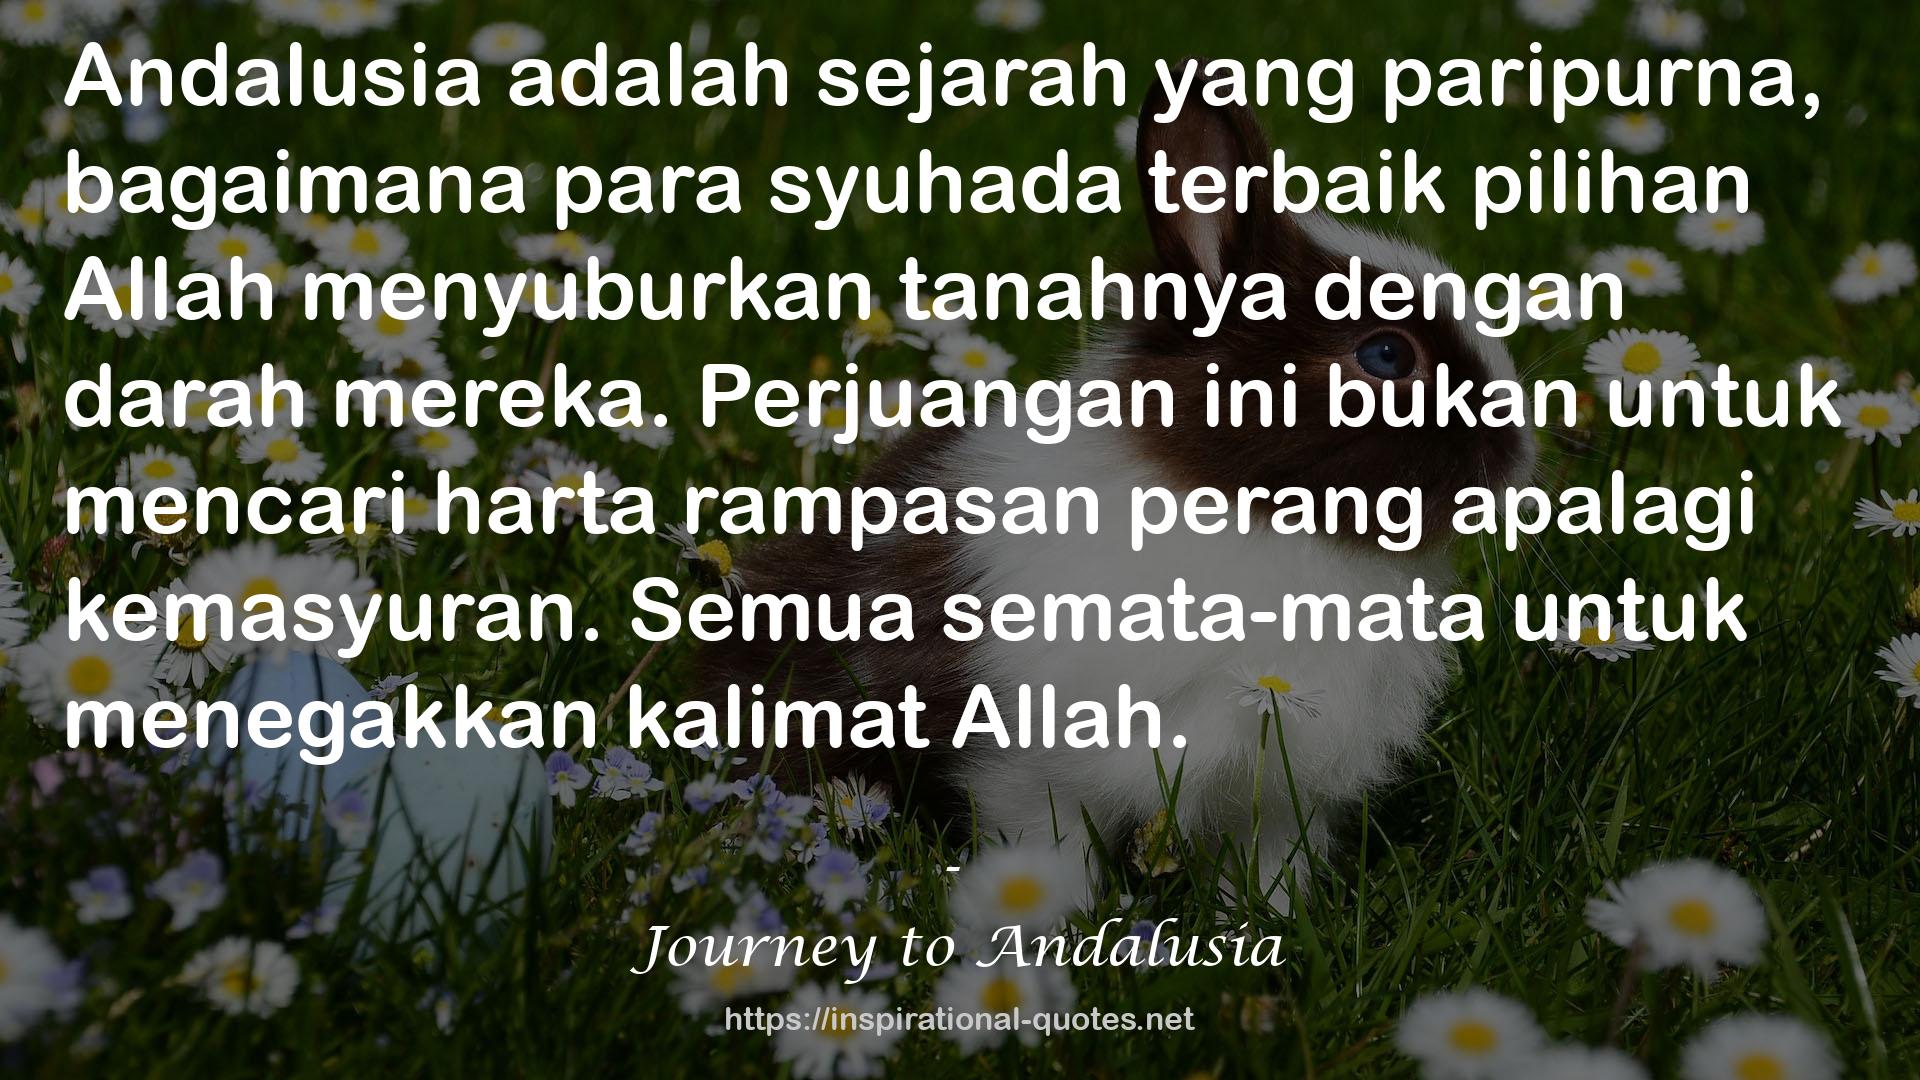 Journey to Andalusia QUOTES